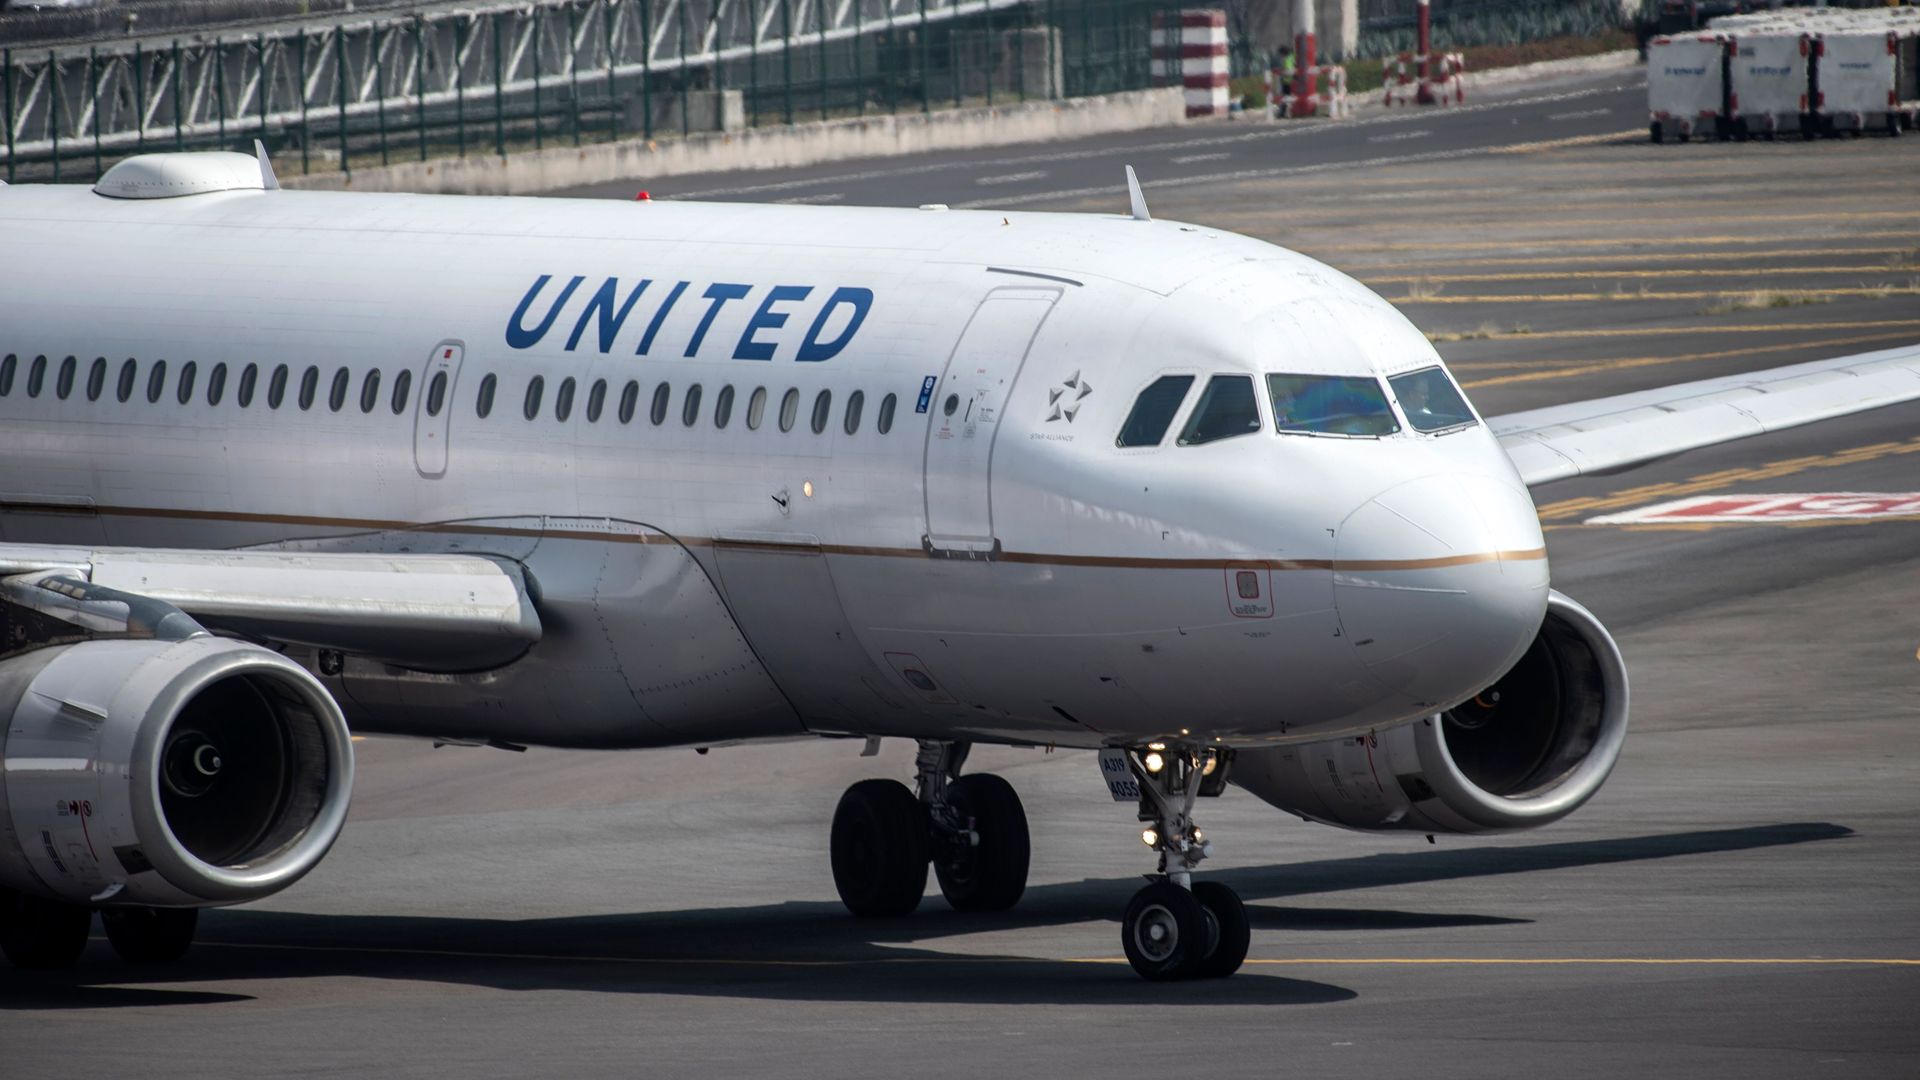 Image of a United Airlines jet on the runway